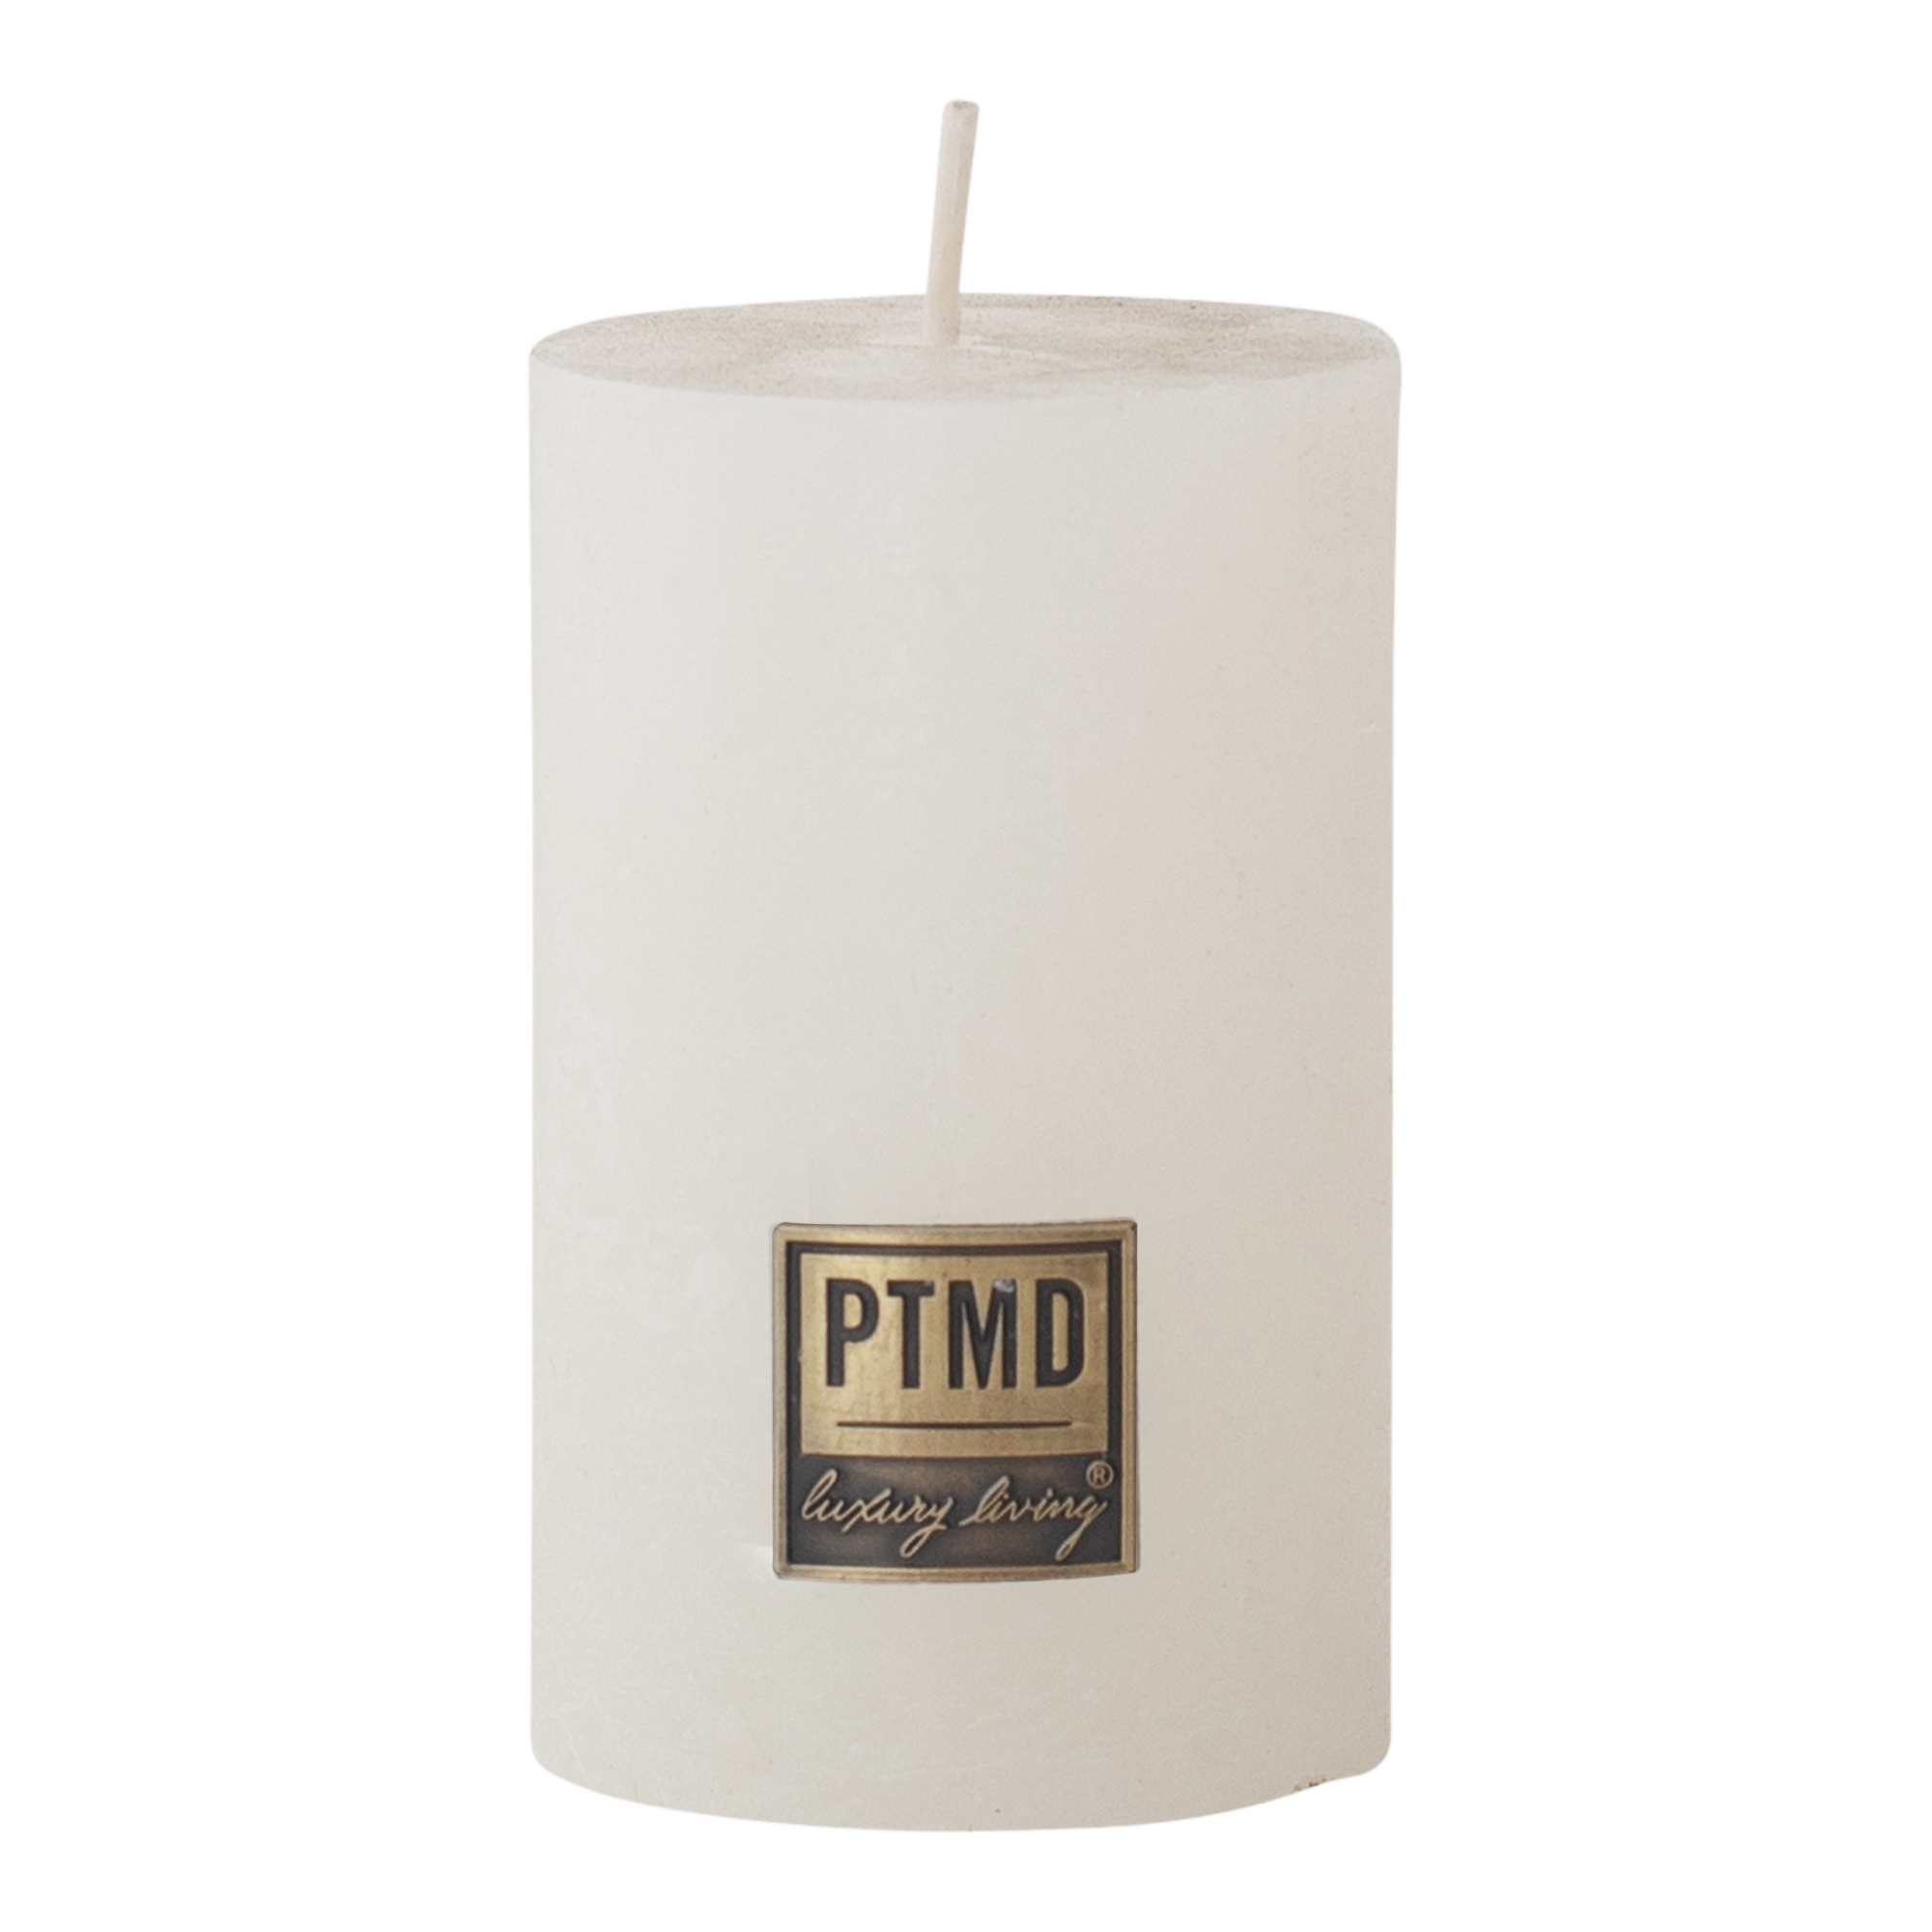 ptmd-8-x-5cm-rustic-hot-white-pillar-candle